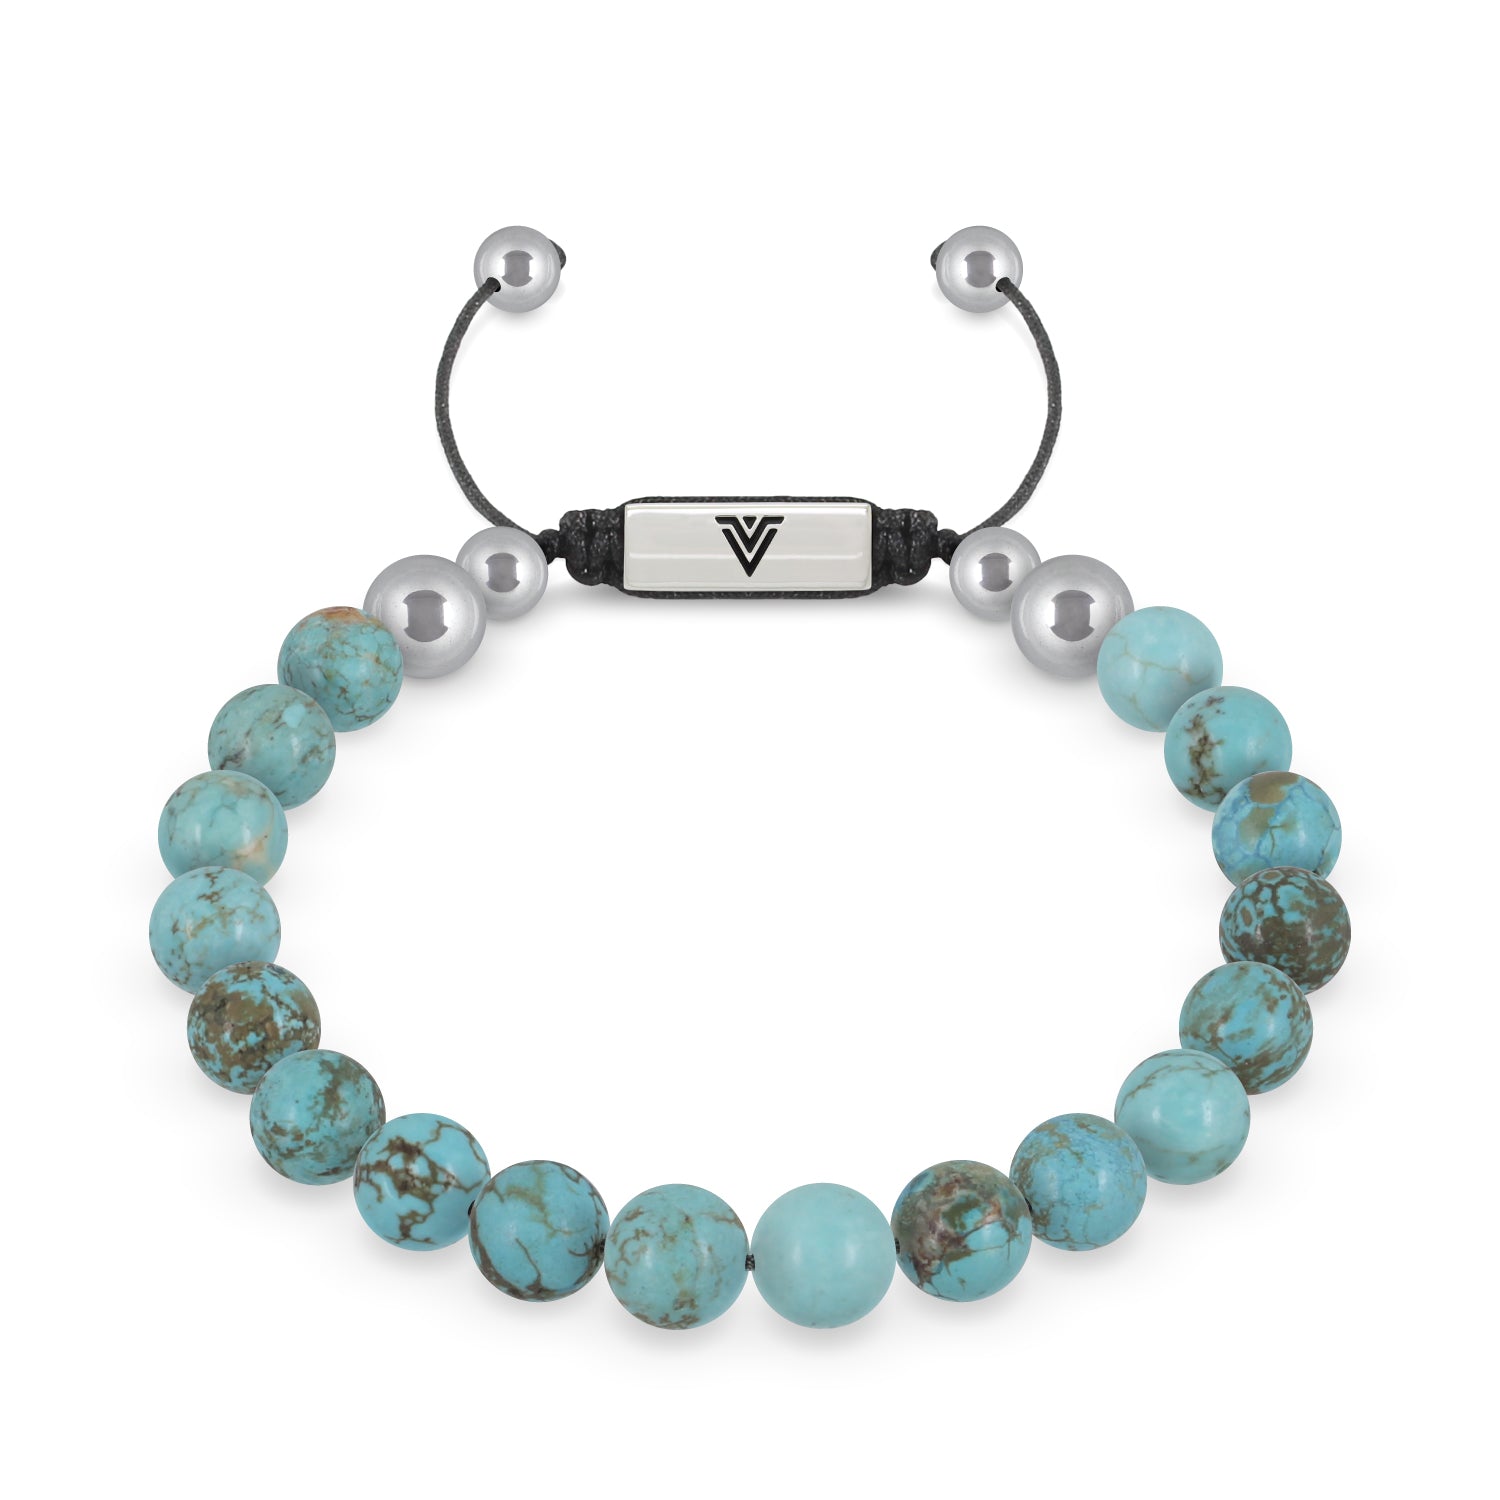 Front view of an 8mm Turquoise beaded shamballa bracelet with silver stainless steel logo bead made by Voltlin